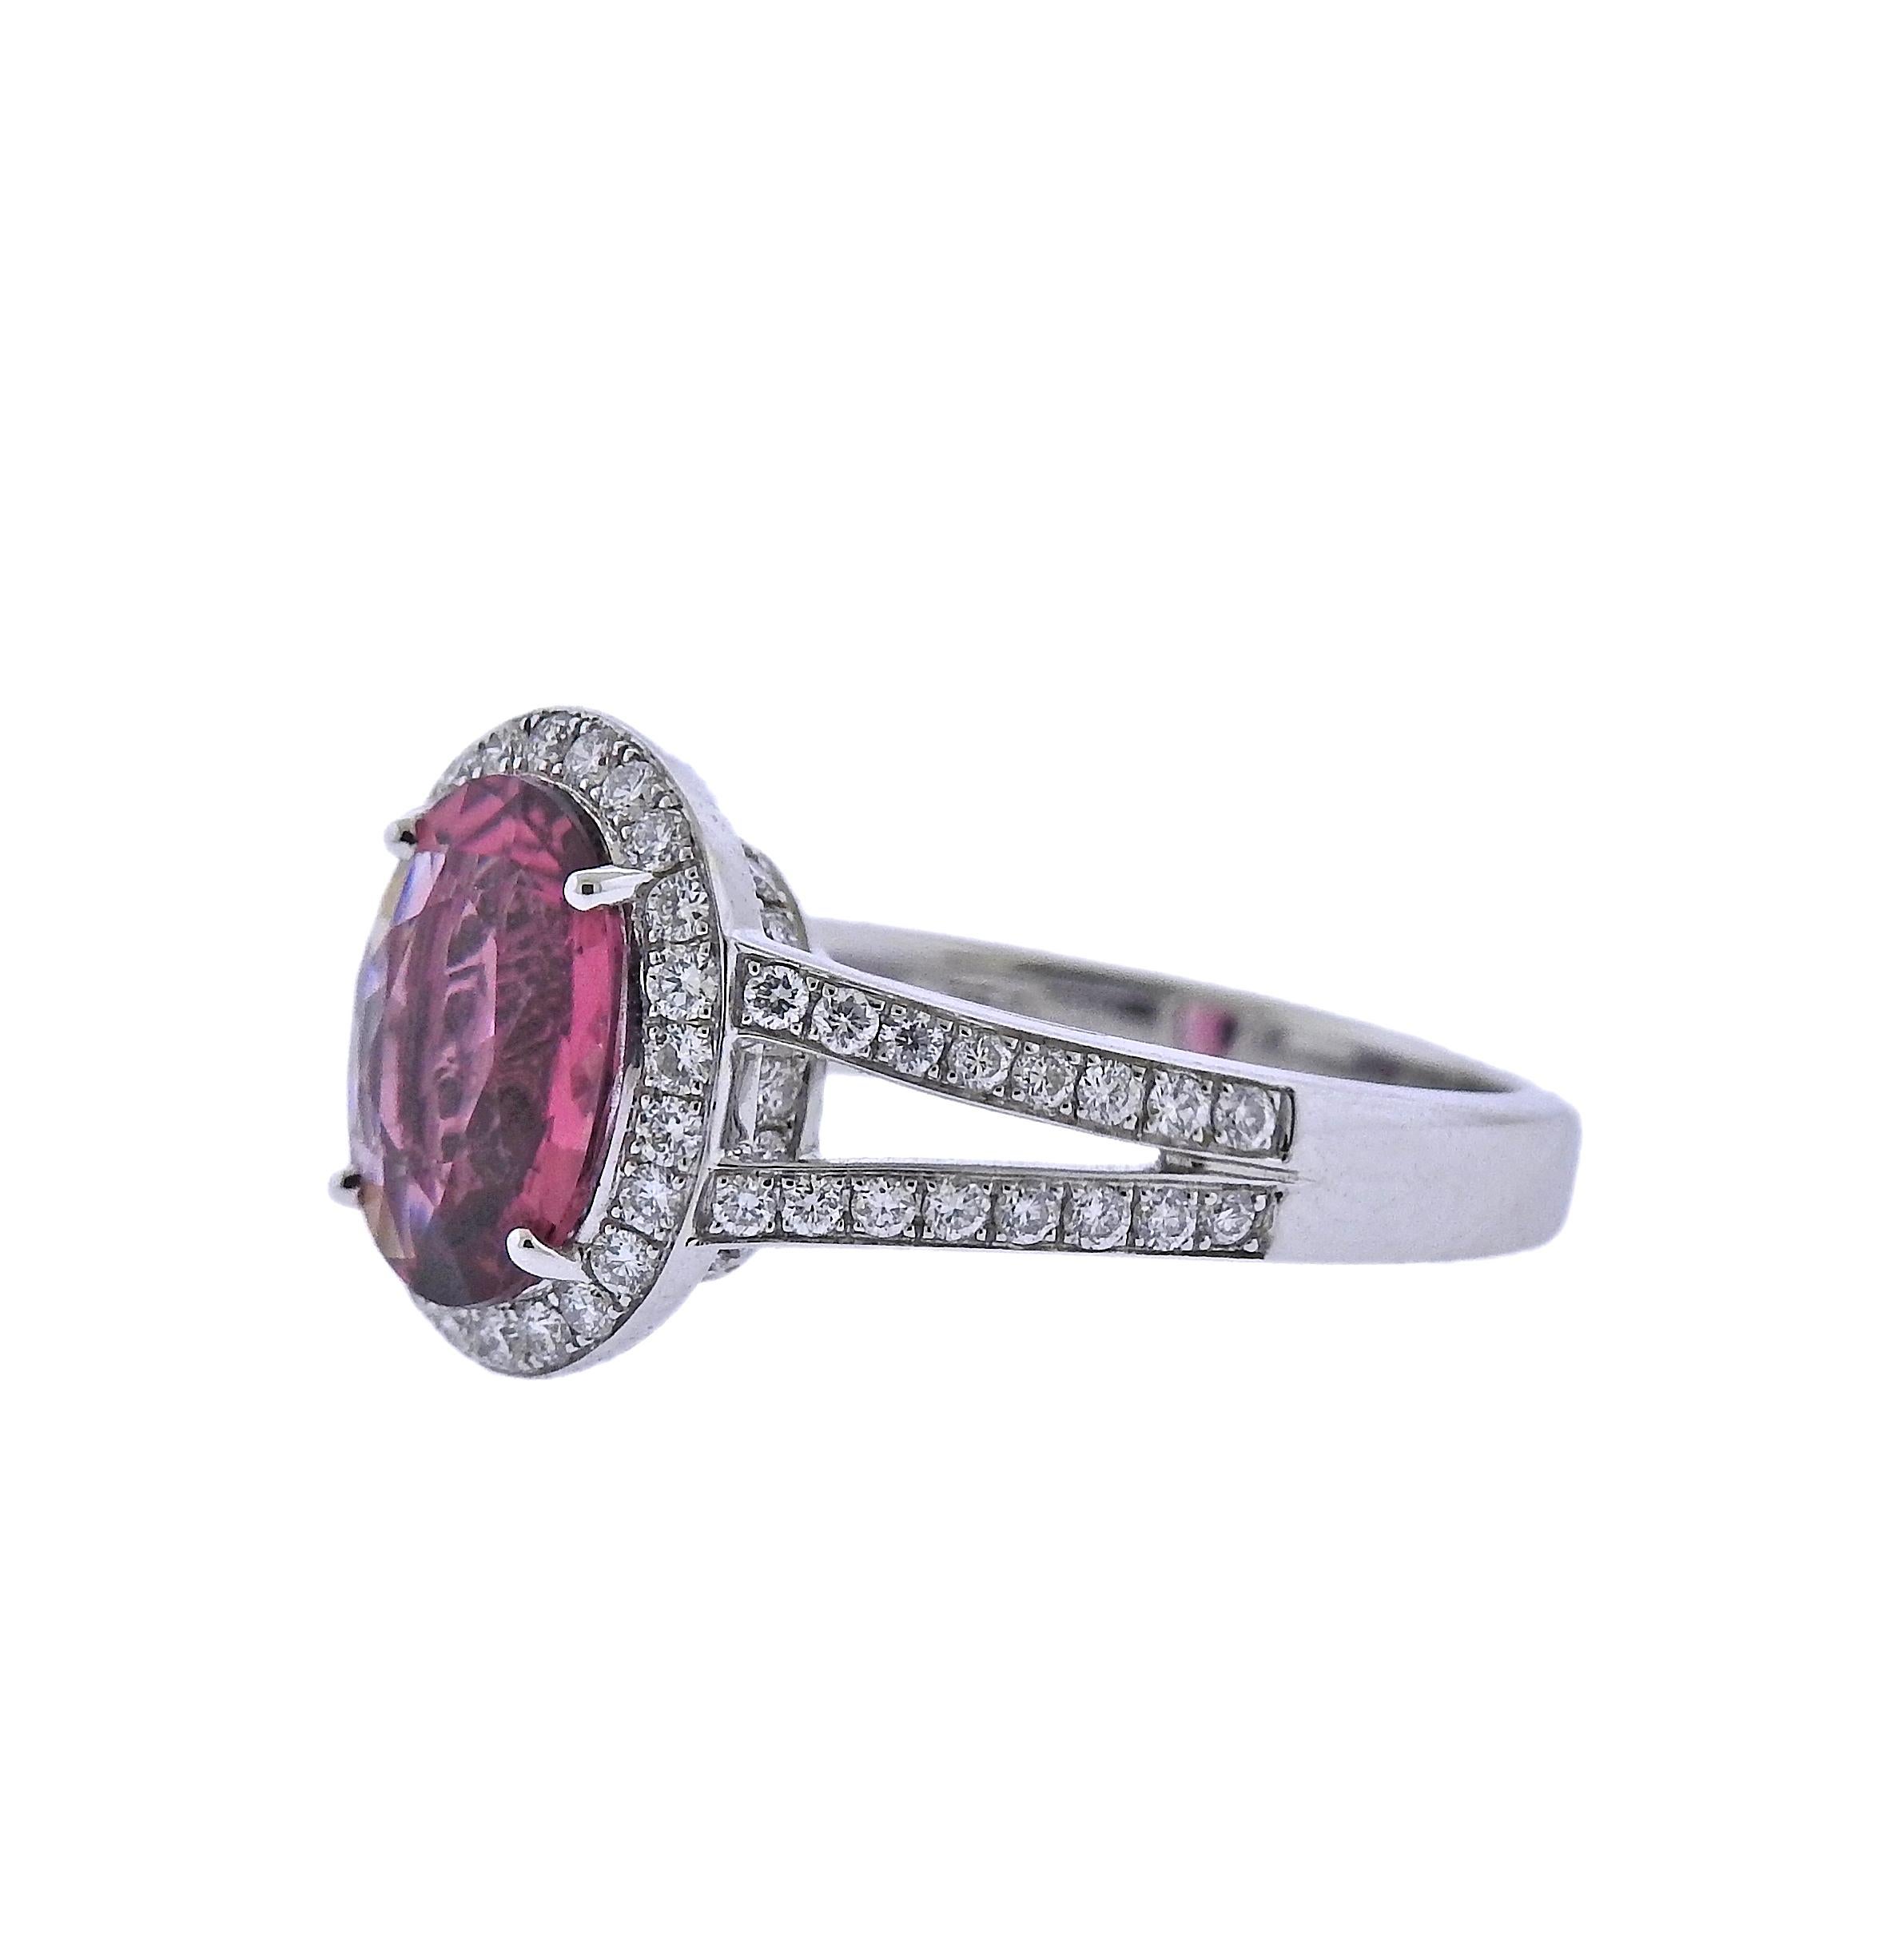 Brand new with tag Bucherer ring, with center 2.46ct pink tourmaline and 0.56ctw VS/G diamonds. Ring size - 6; top measures 13mm x 12mm. Weight: 6.3 grams. Marked: CB,750. .  With original  box.